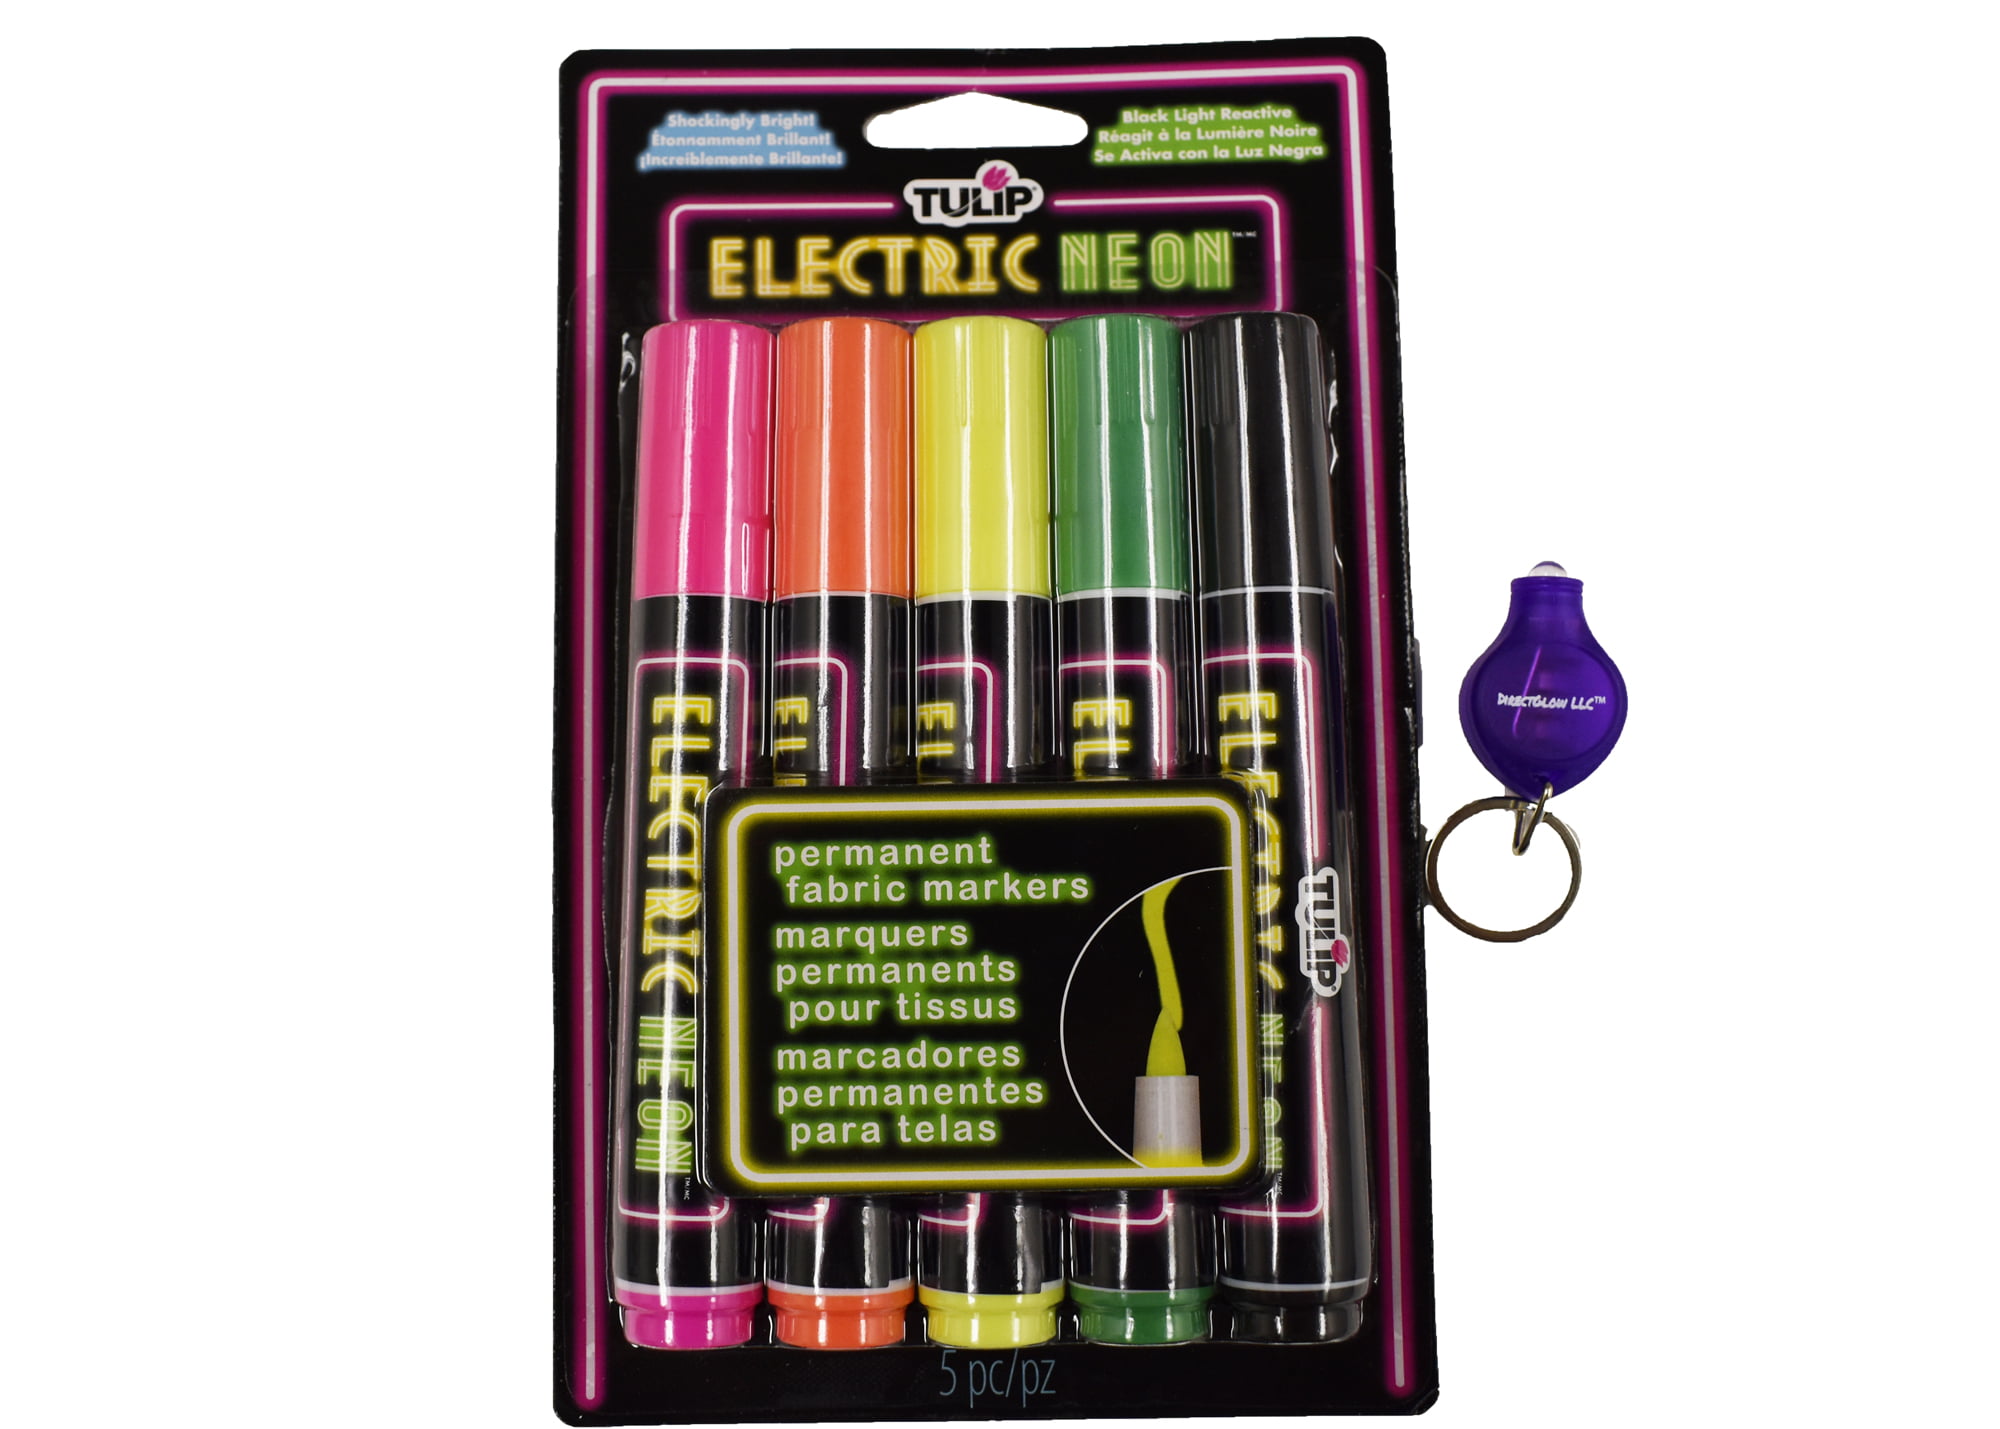 Blacklight Reactive Electric Neon Permanent Fabric Markers 5 Pack with